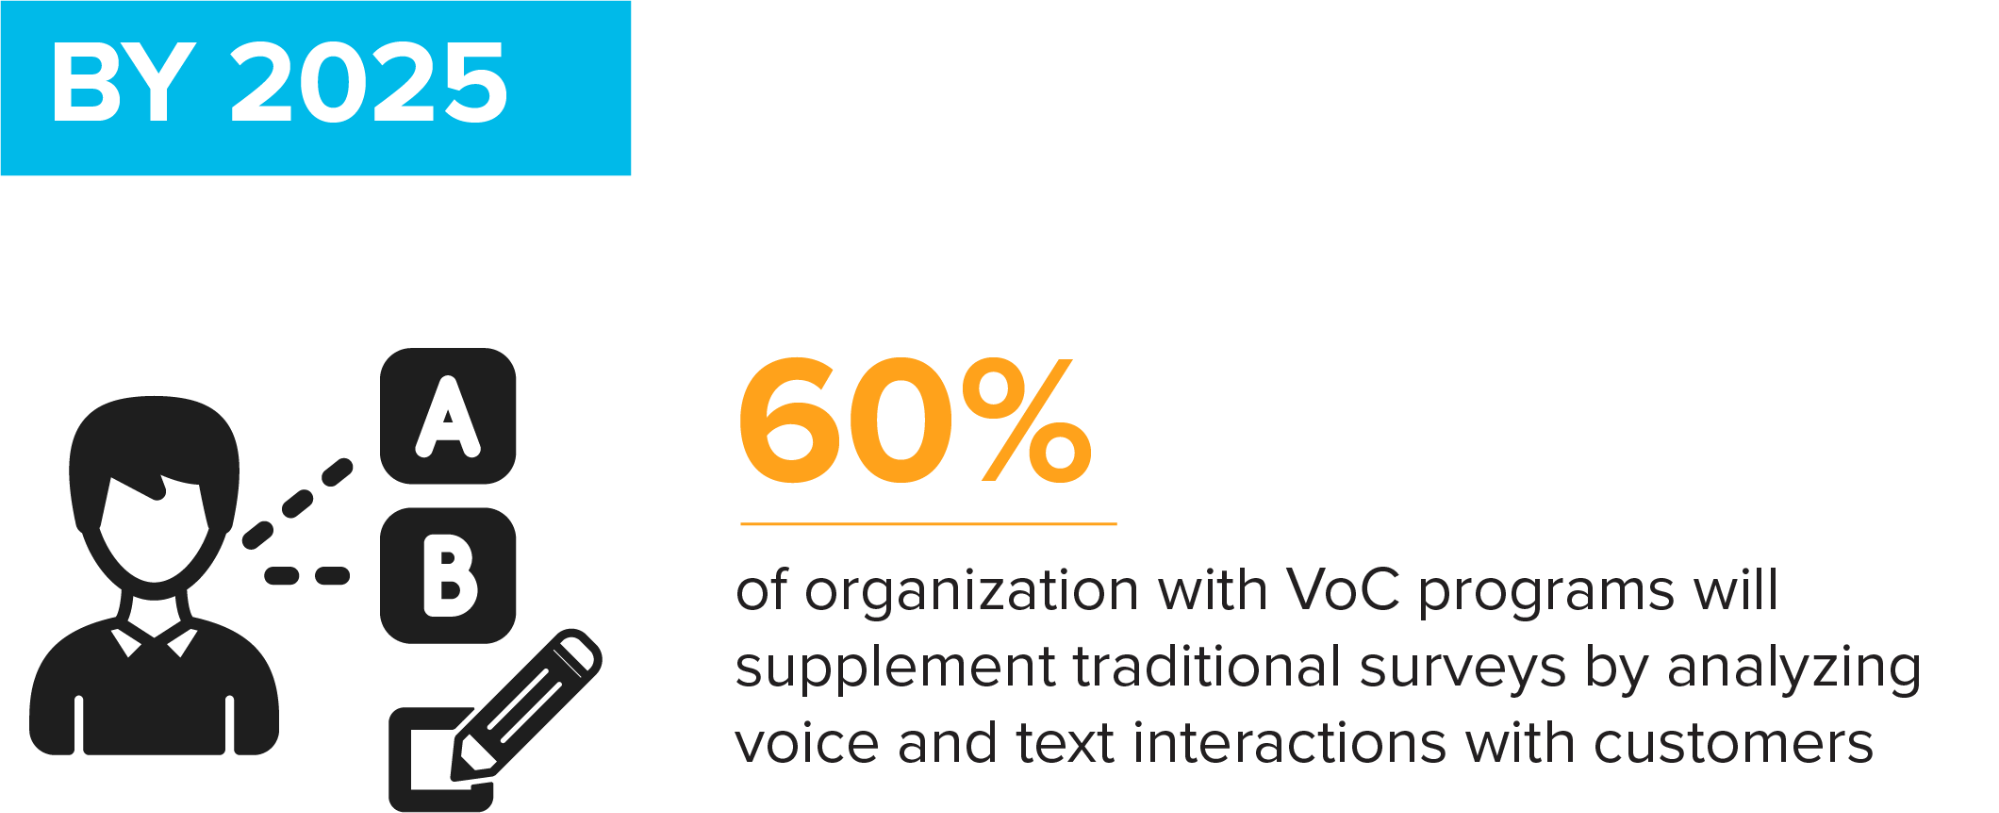 A well-implemented voice of customer (VoC) program can also complement your customer service efforts. 60% organizations with VoC programs will supplement traditional surveys analyzing voice and text interactions with customers.